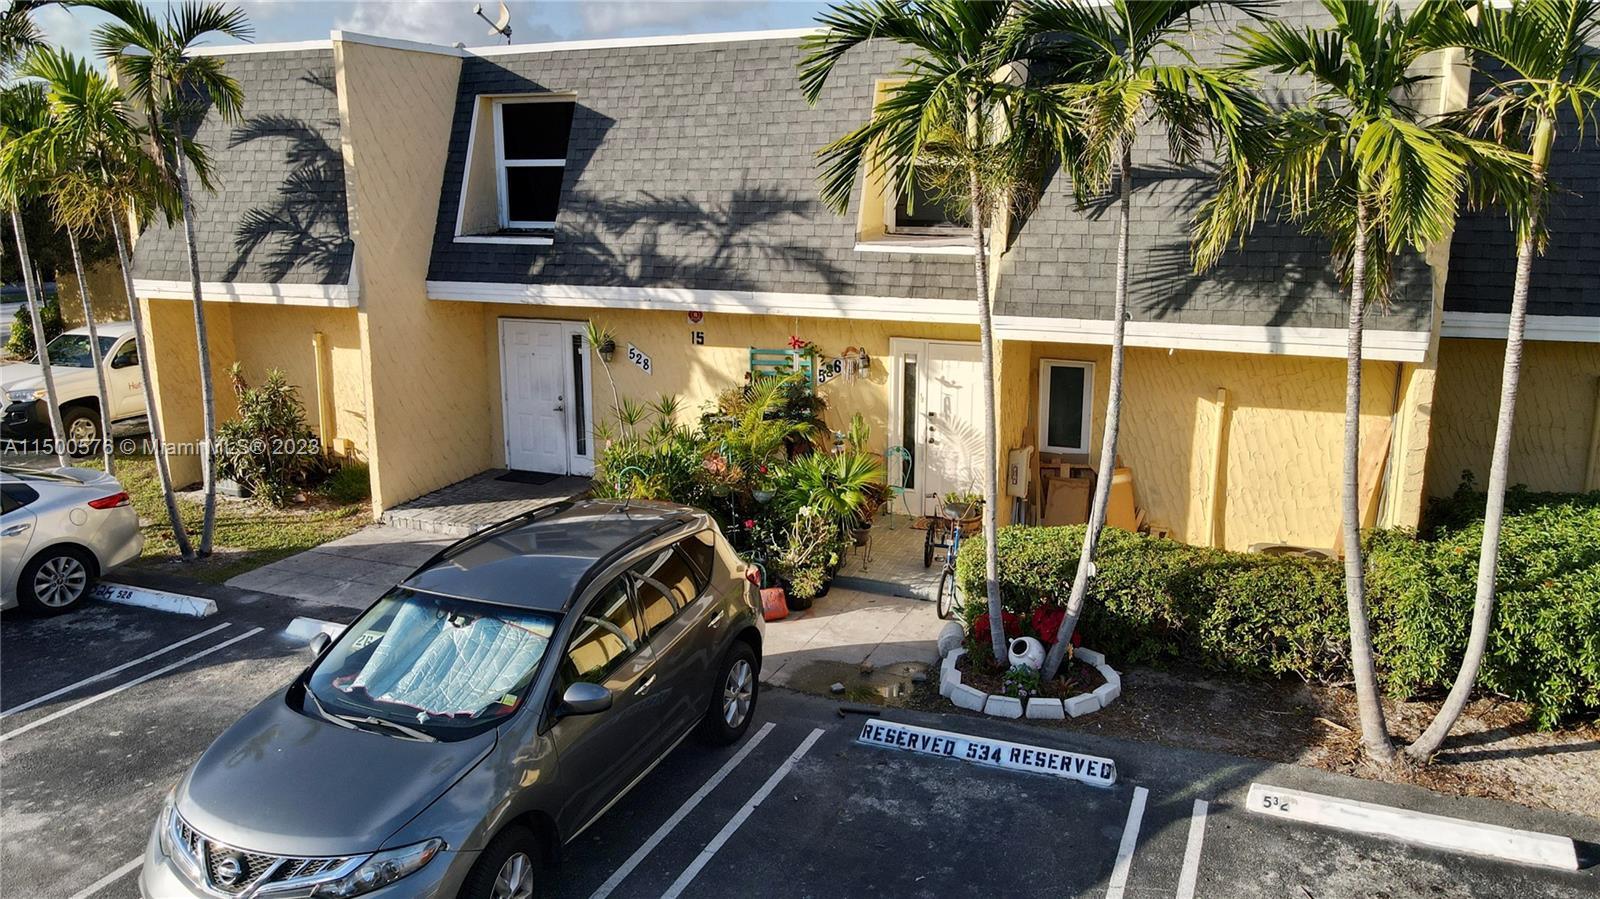 Great 2 Bedroom/1.5 Bathroom Townhouse in the Heart of Boynton Beach. This Cozy Townhouse Features W